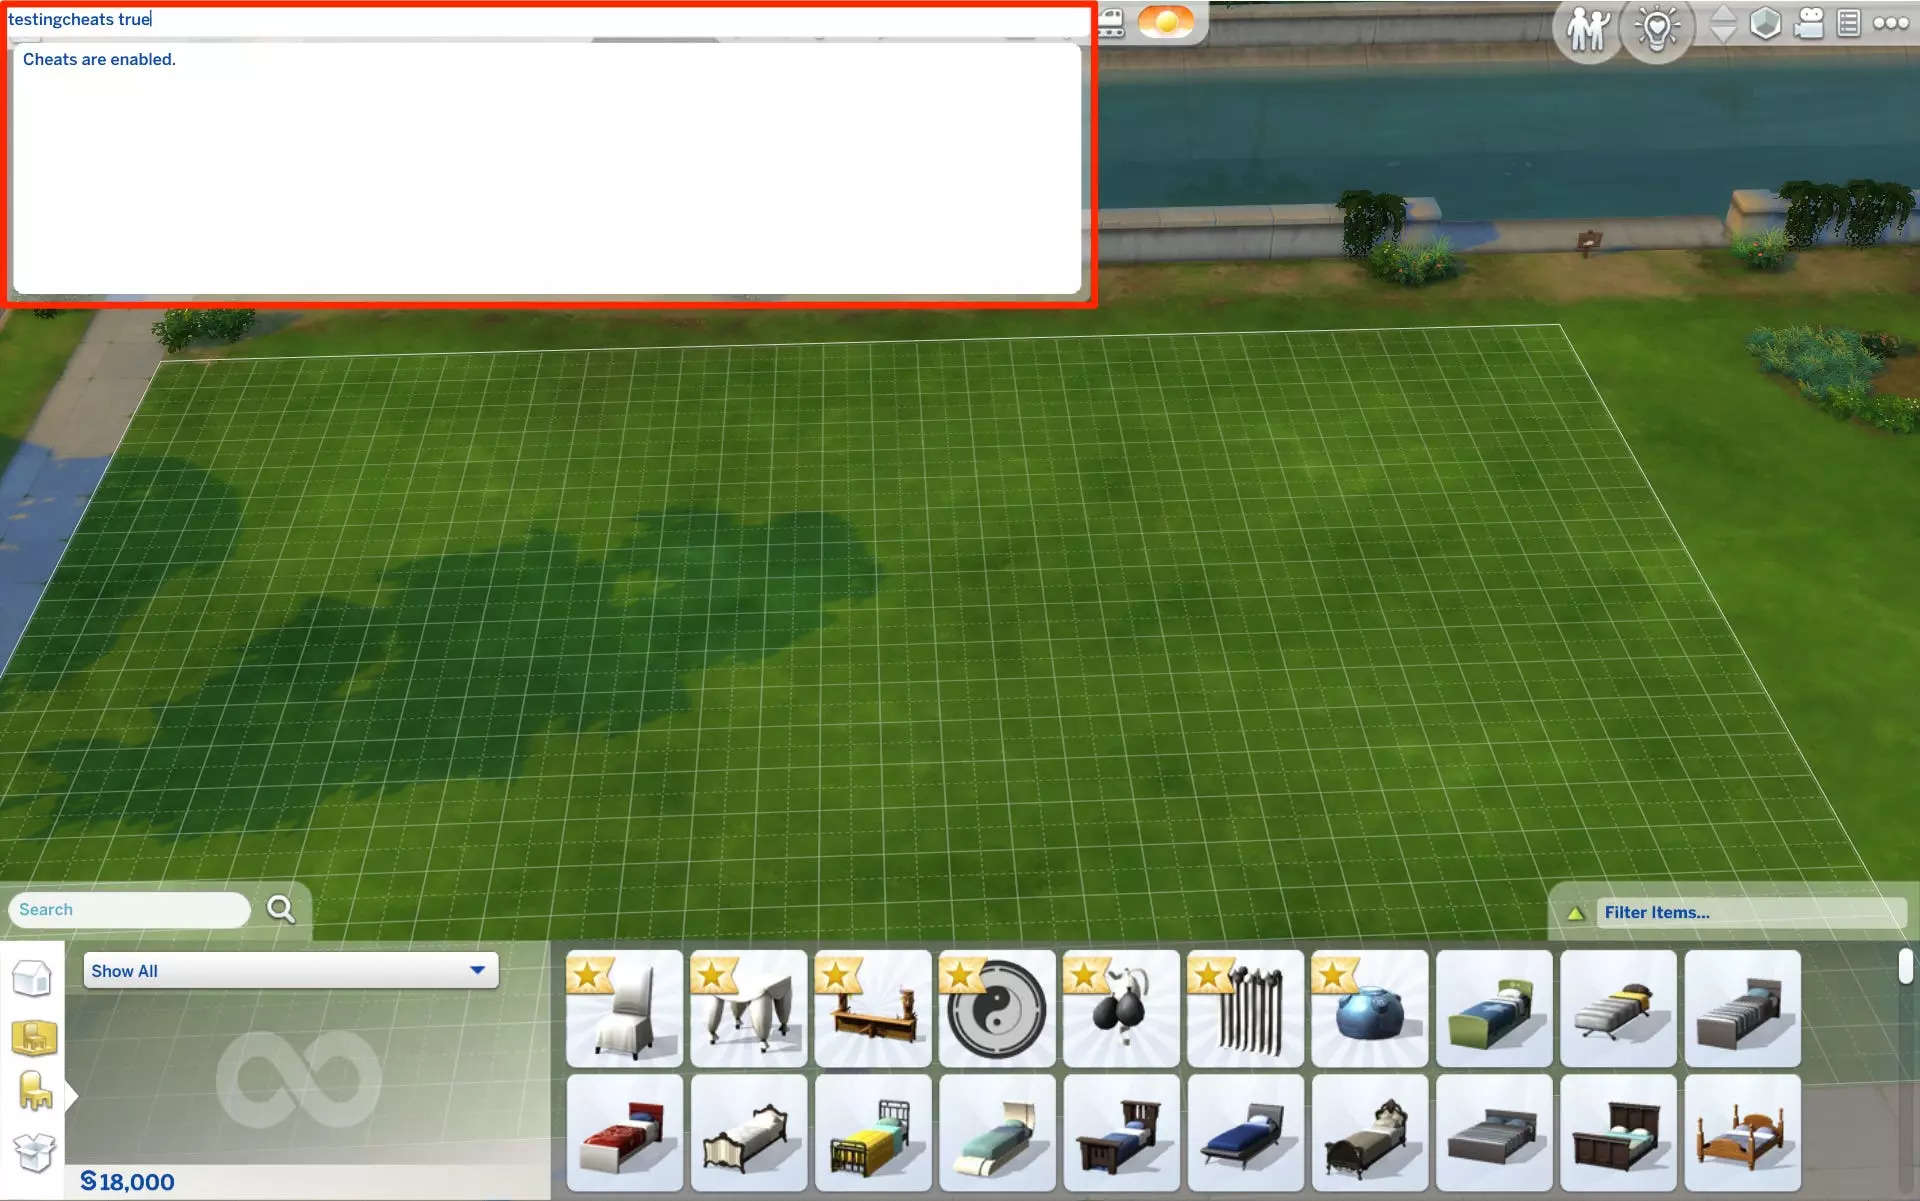 How to unlock all items in The Sims 4, including debug items